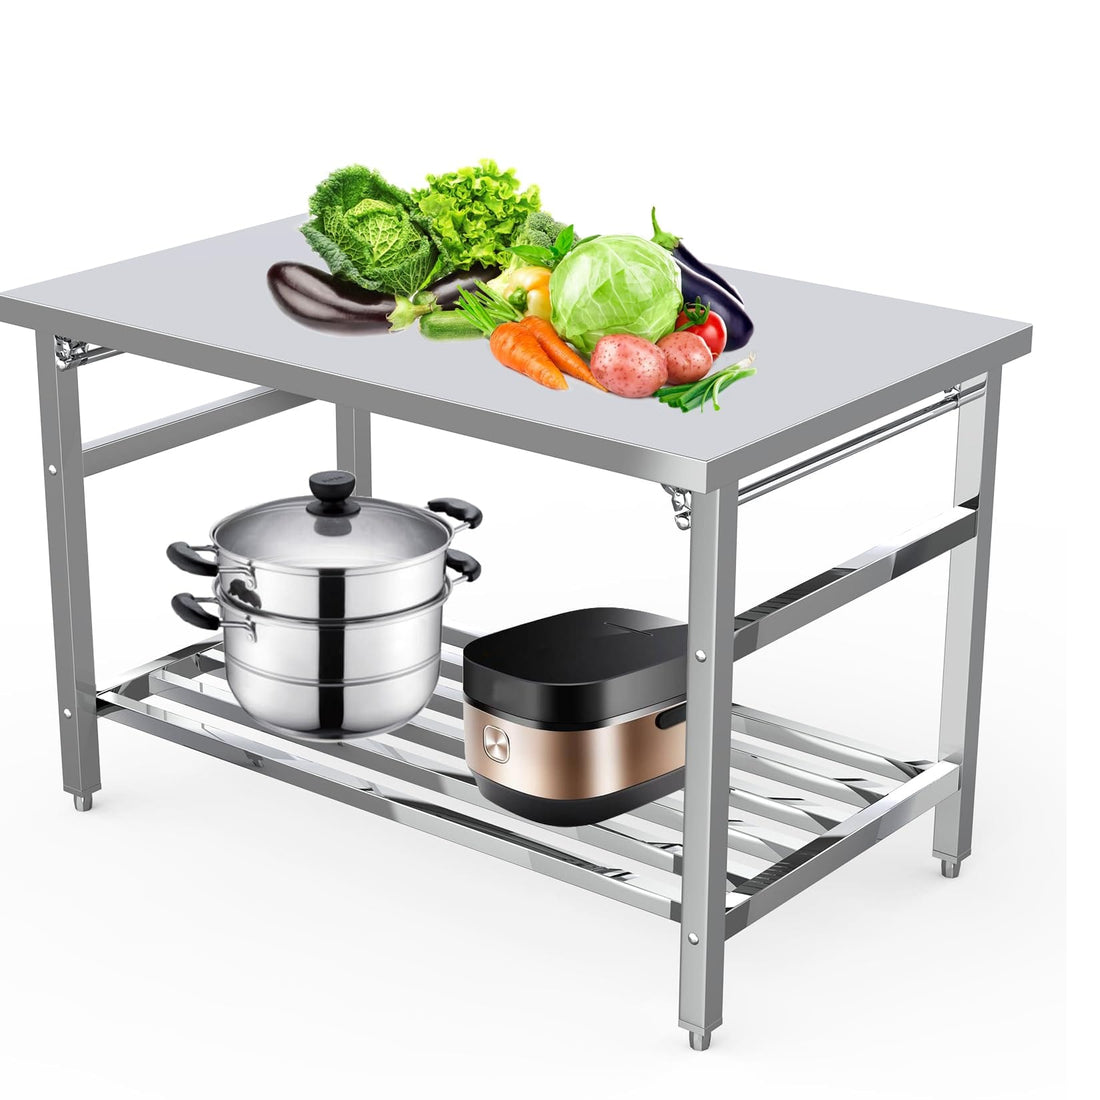 GARVEE 48 x 30 Inches, Stainless Steel Floding Table, NSF Commercial Kitchen Prep Table with Under Shelf for Restaurant and Home, Foldable